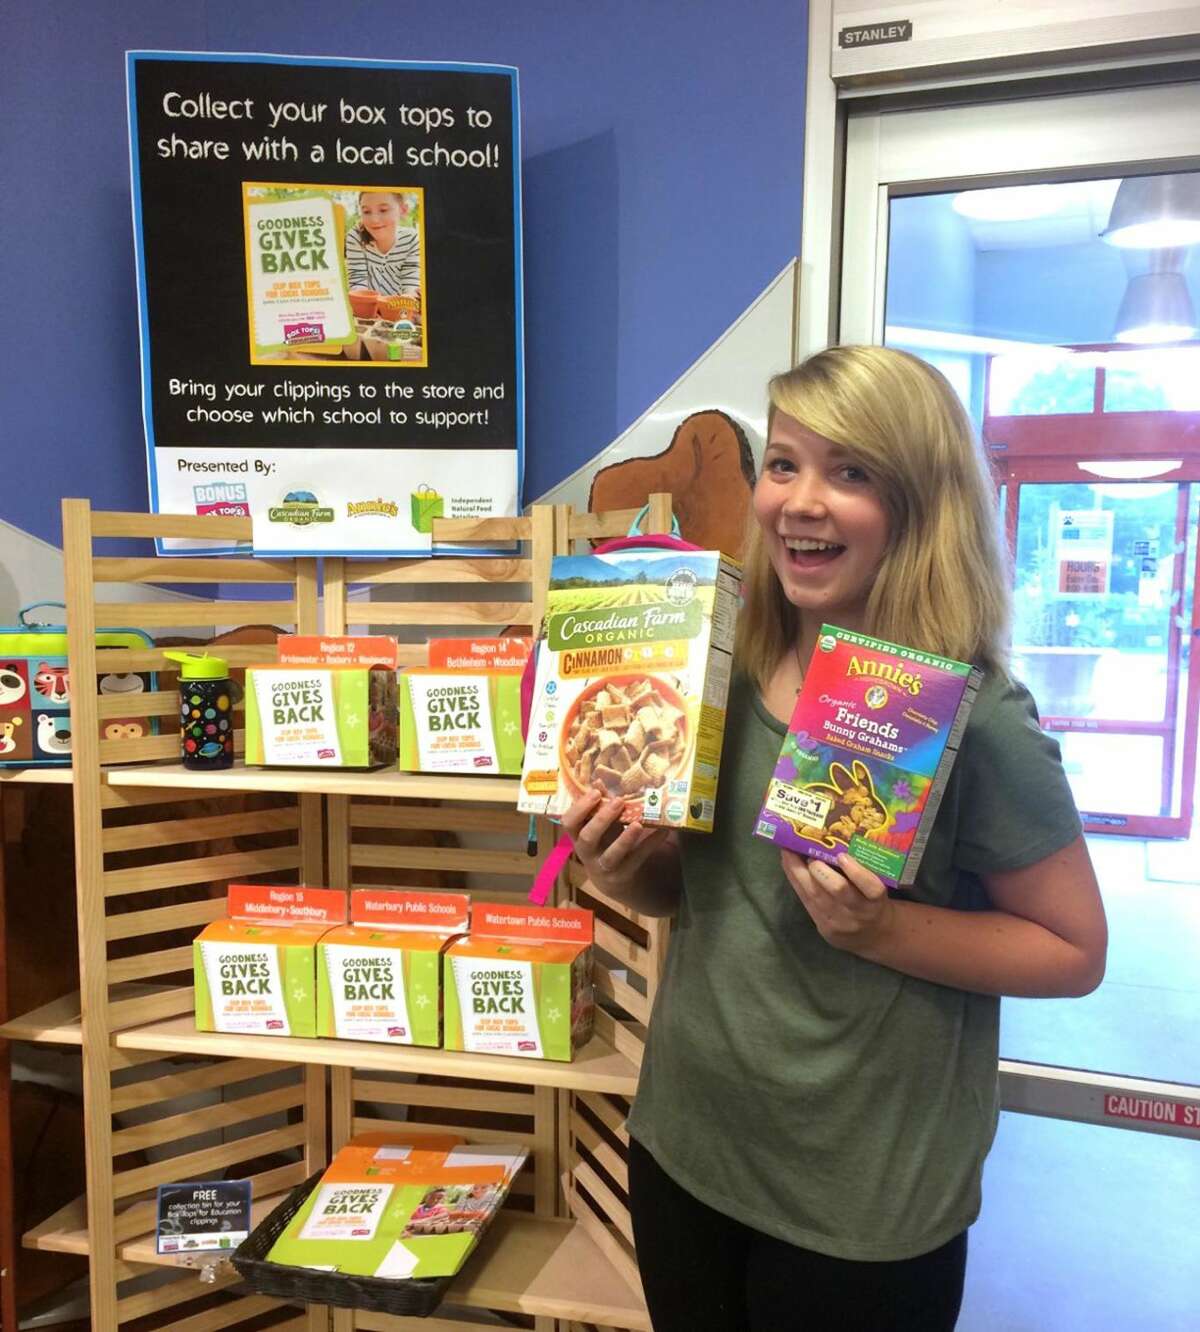 New Morning Market is supporting local schools by collecting Box Tops for Education at the store. Employee Kat Lynch holds Annie's and Cascadian Farm products that now have Box Tops for Education. Residents can support local schools by dropping off Box Tops logos at the market at 129 Main St. North in Woodbury.